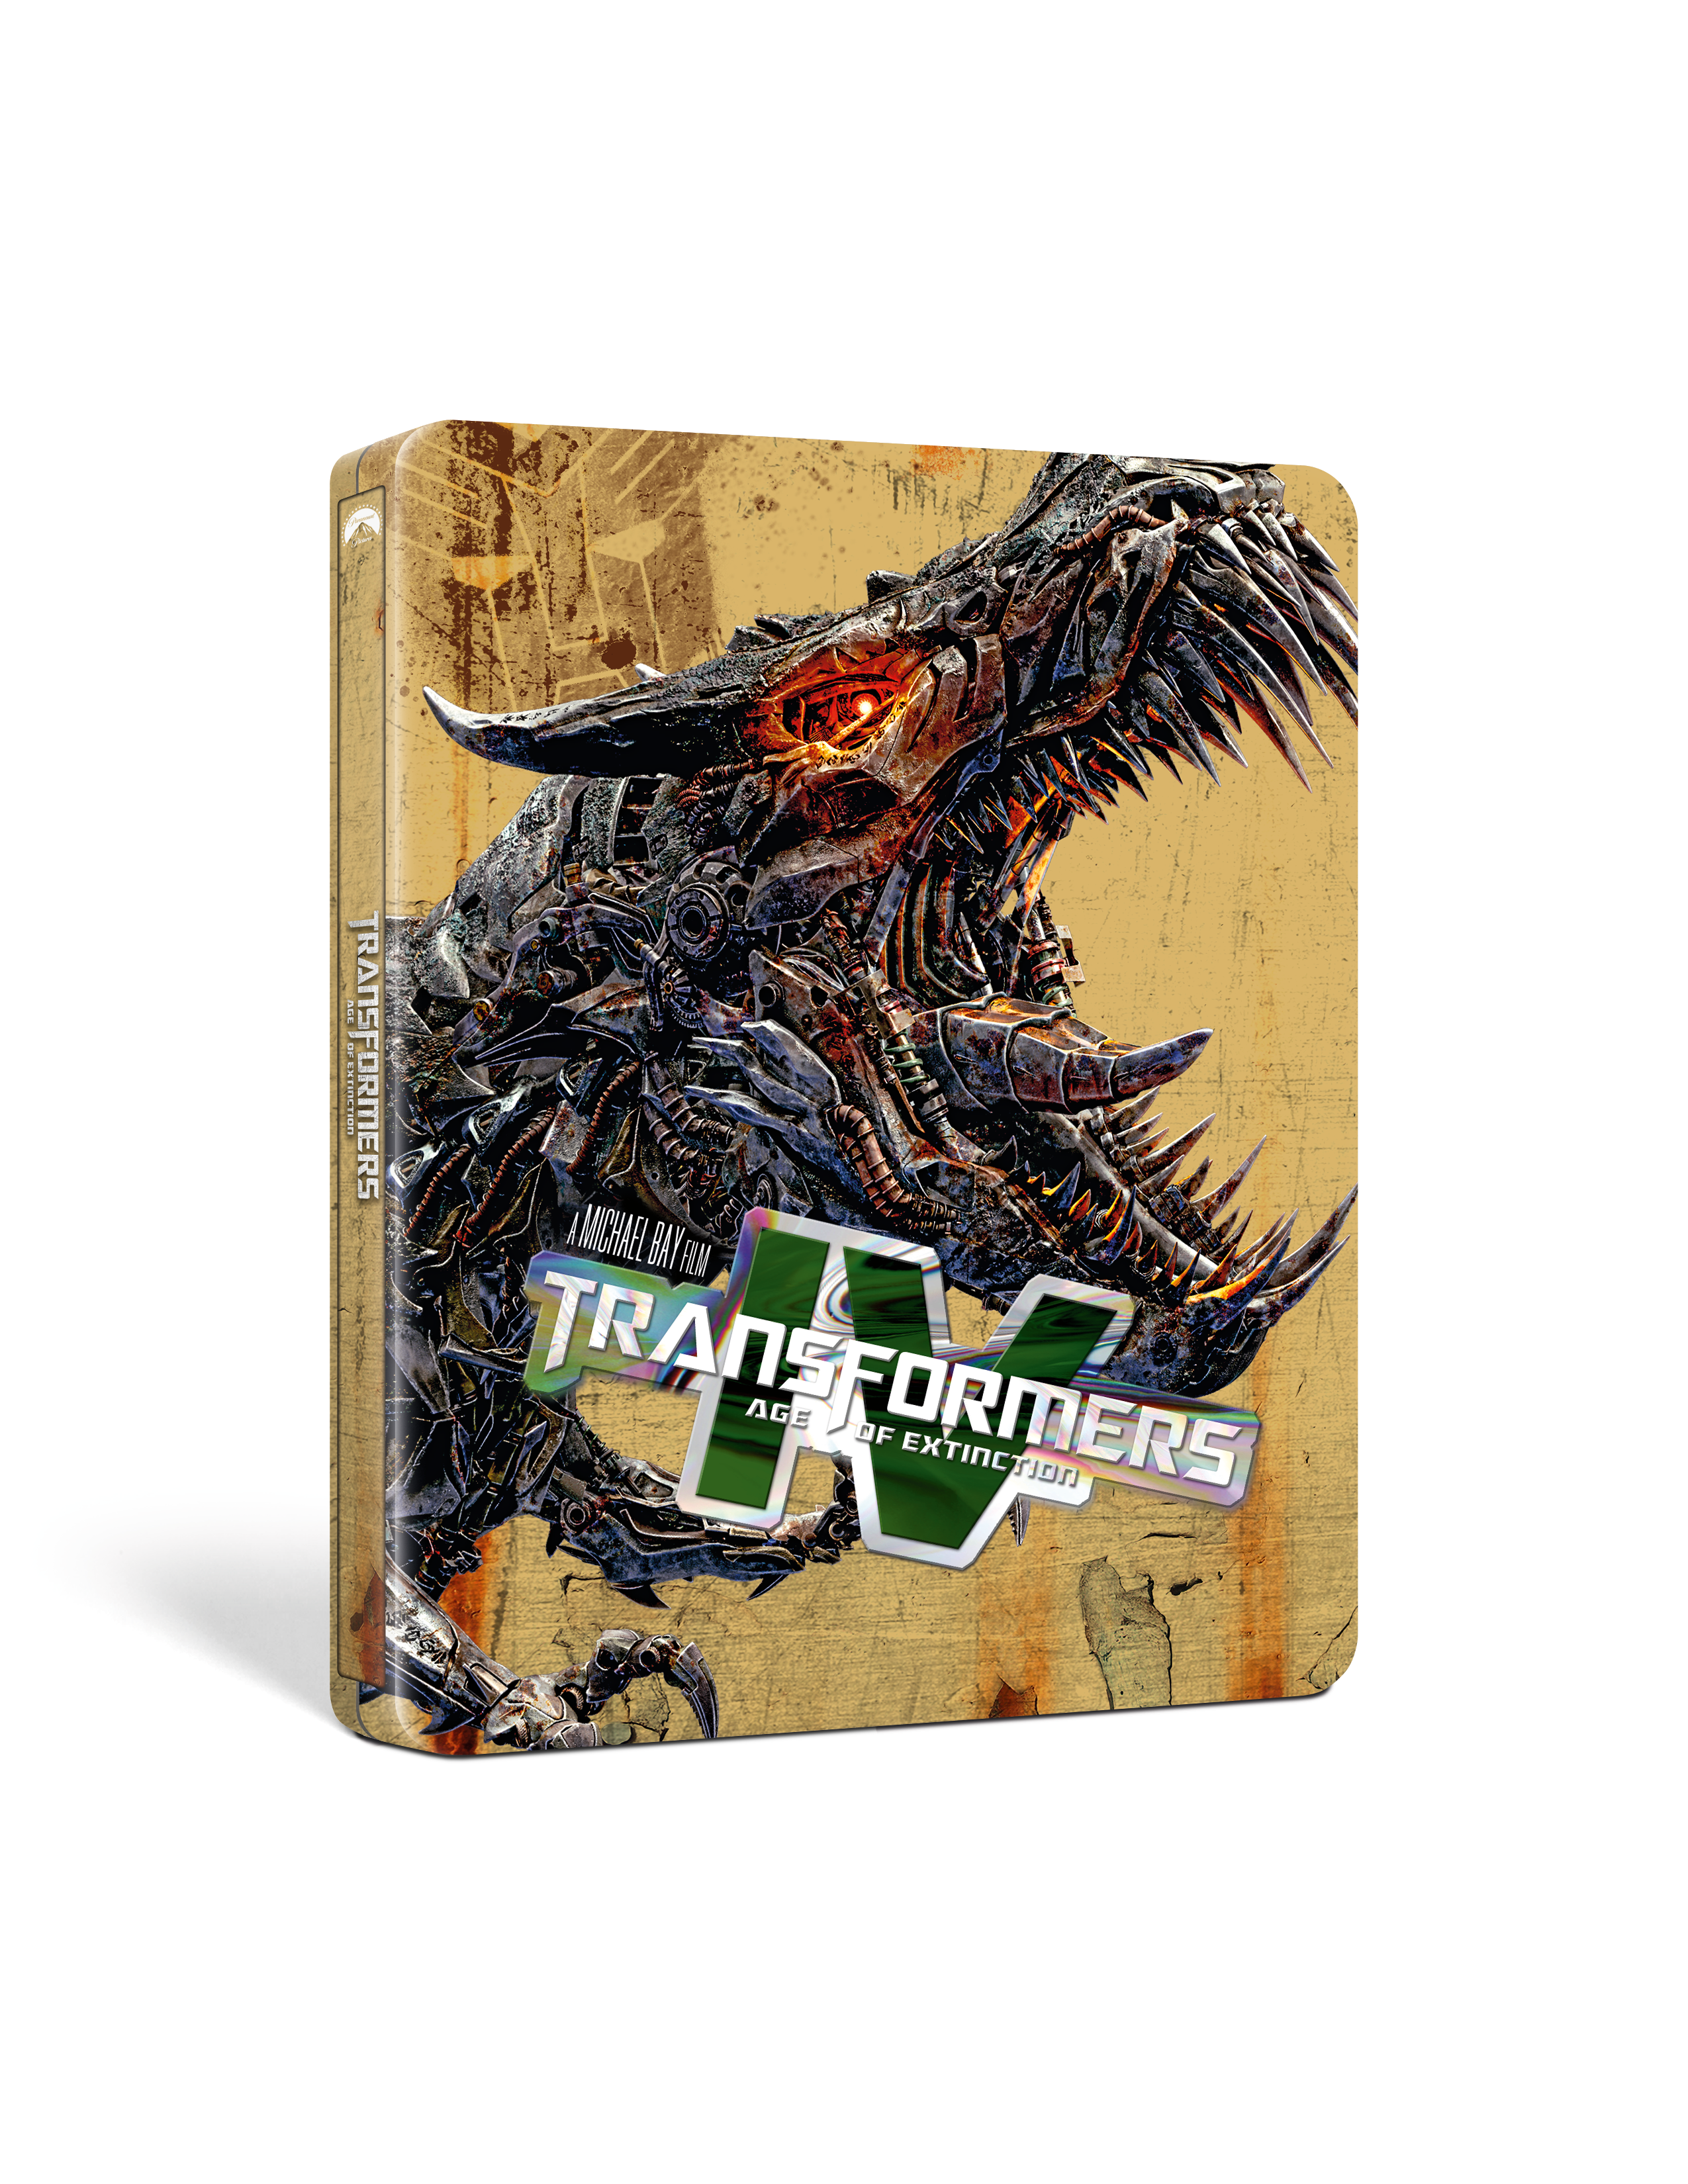 Get Ready for Action with the TRANSFORMERS 6-Movie SteelBook Collection Arriving on May 30th 3